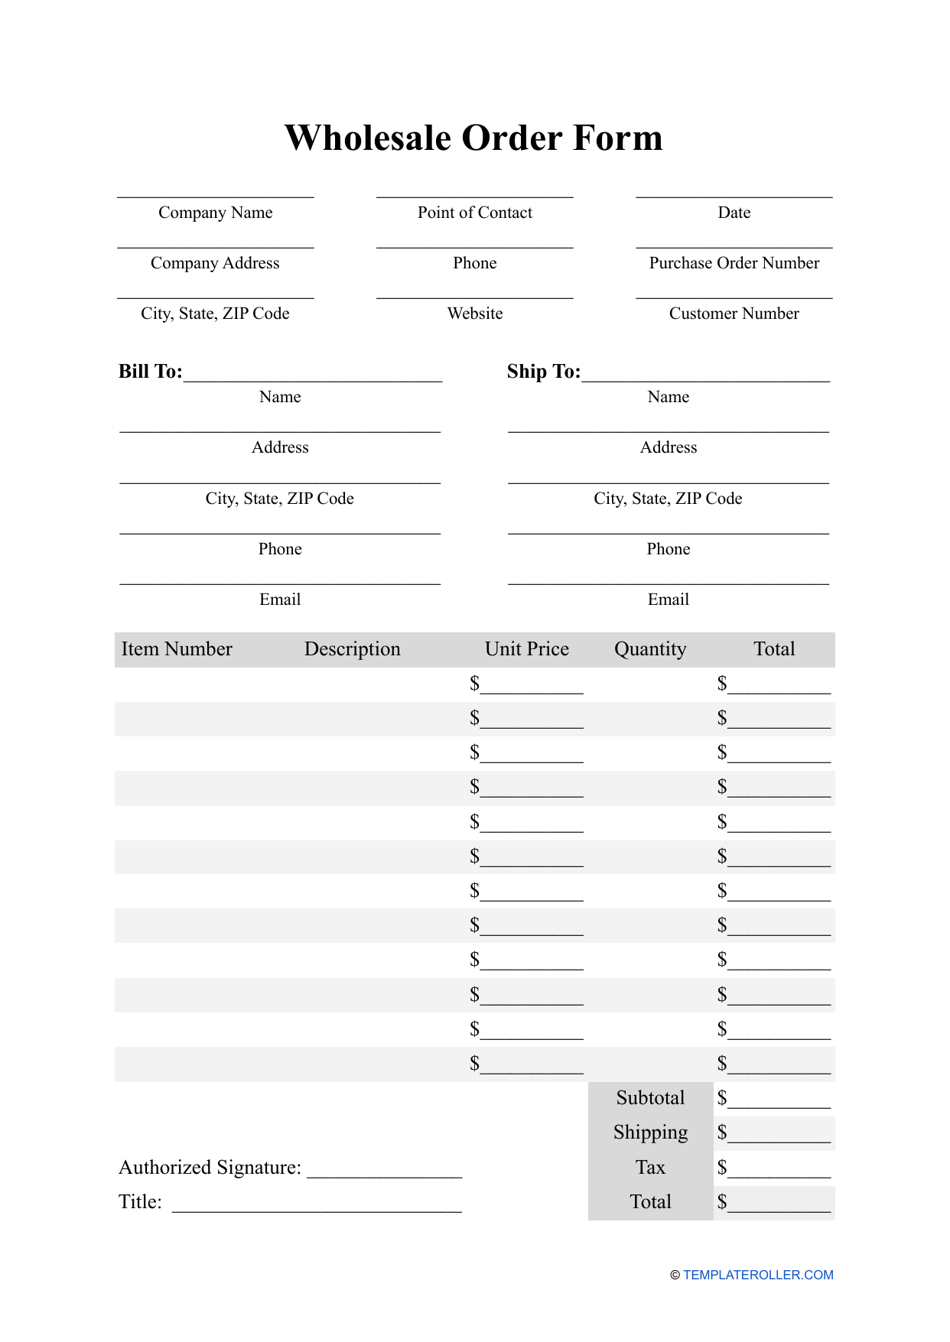 Wholesale Order Form Template Fill Out Sign Online and Download PDF